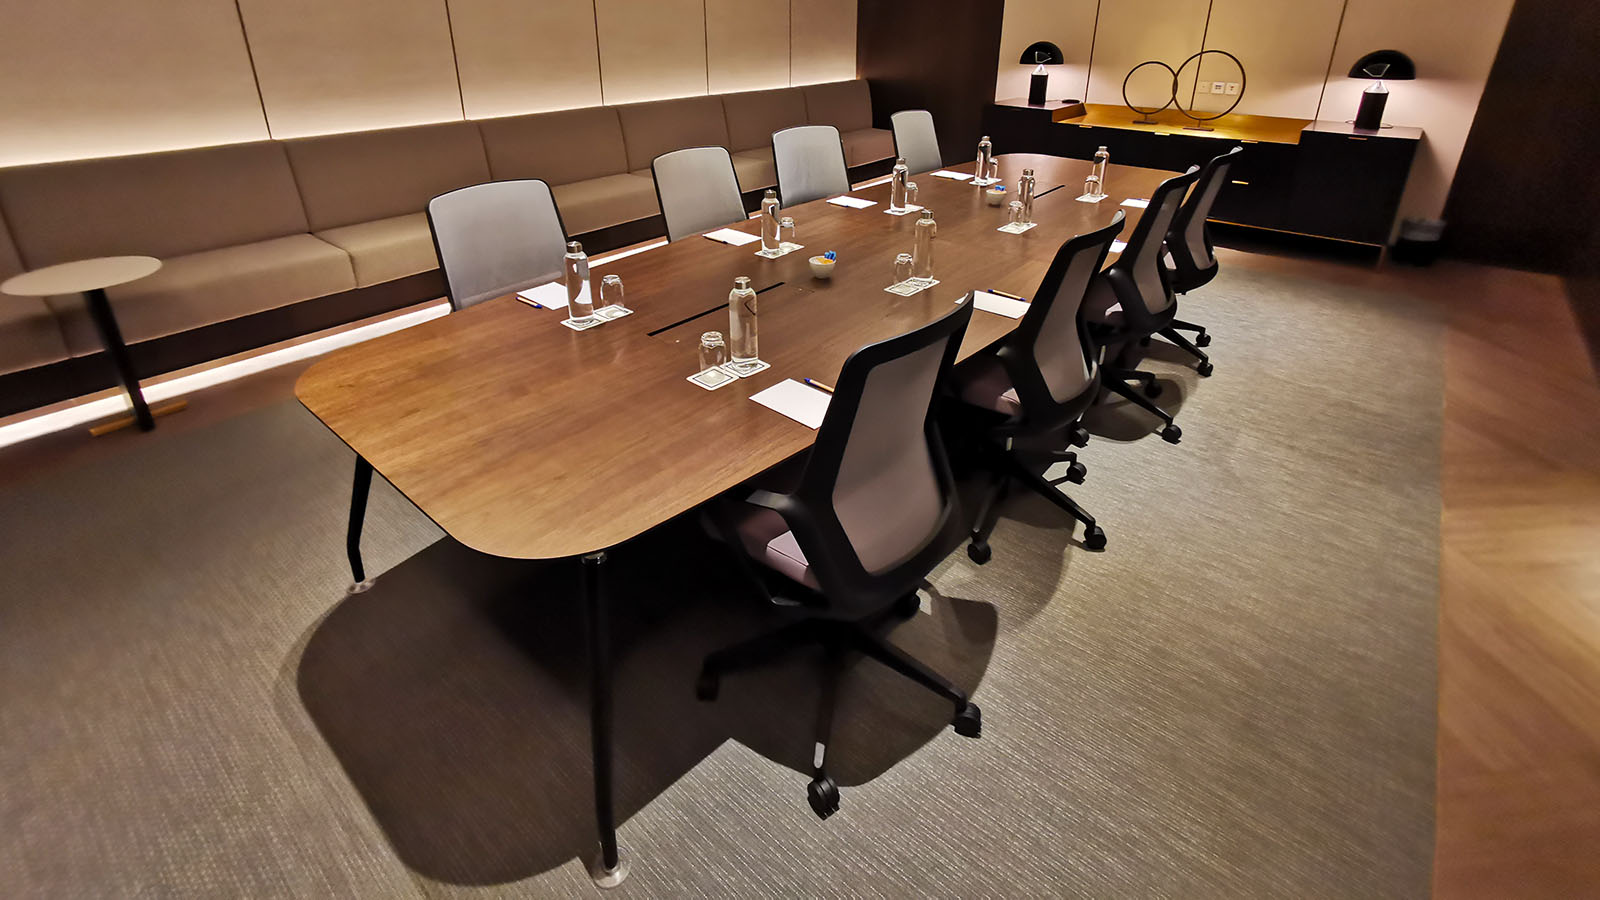 Boardroom at Hilton Singapore Orchard hotel